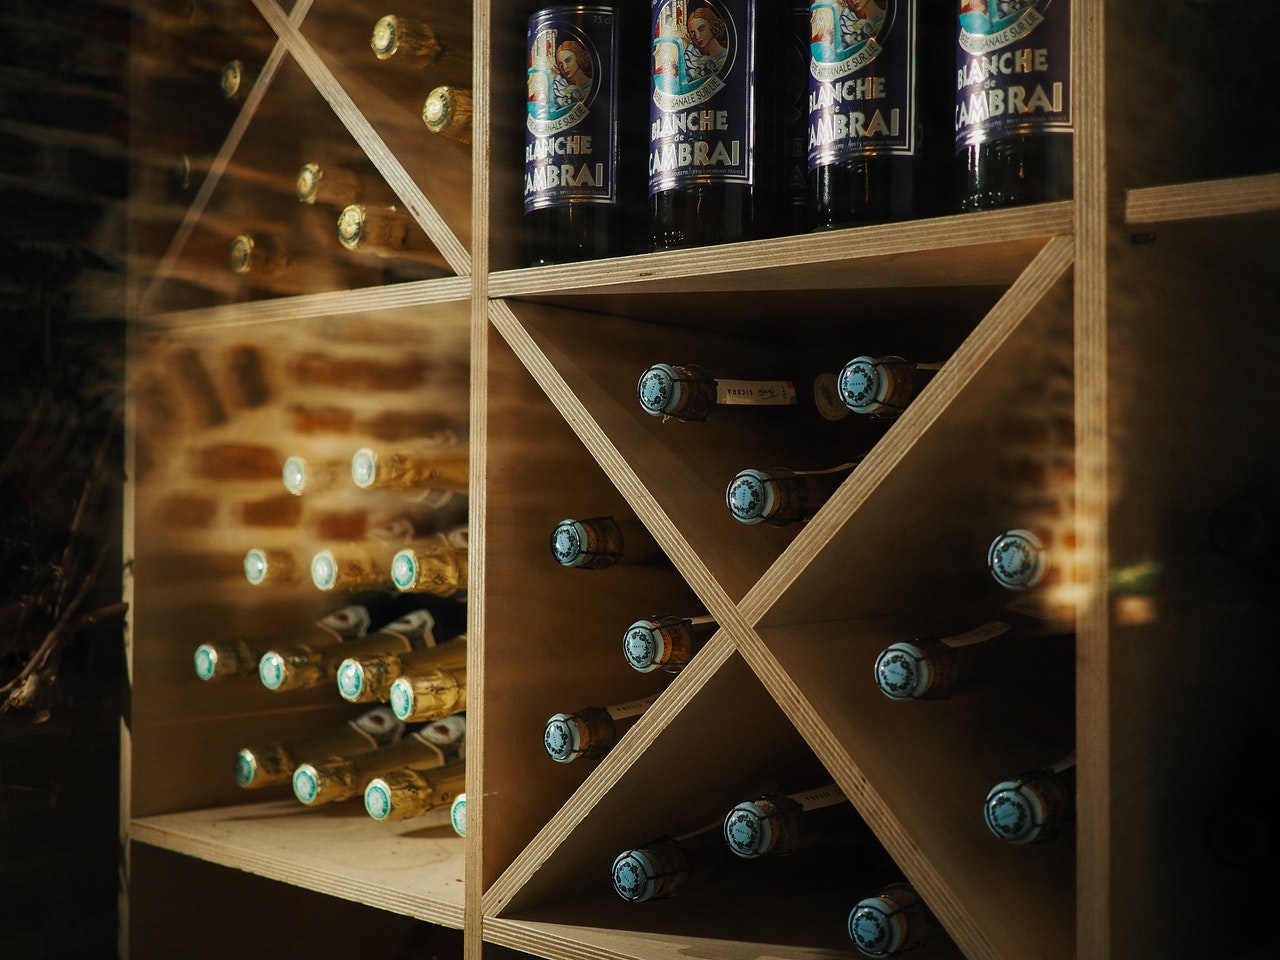 Blanche Cambrai bottles organized in a wooden wine rack